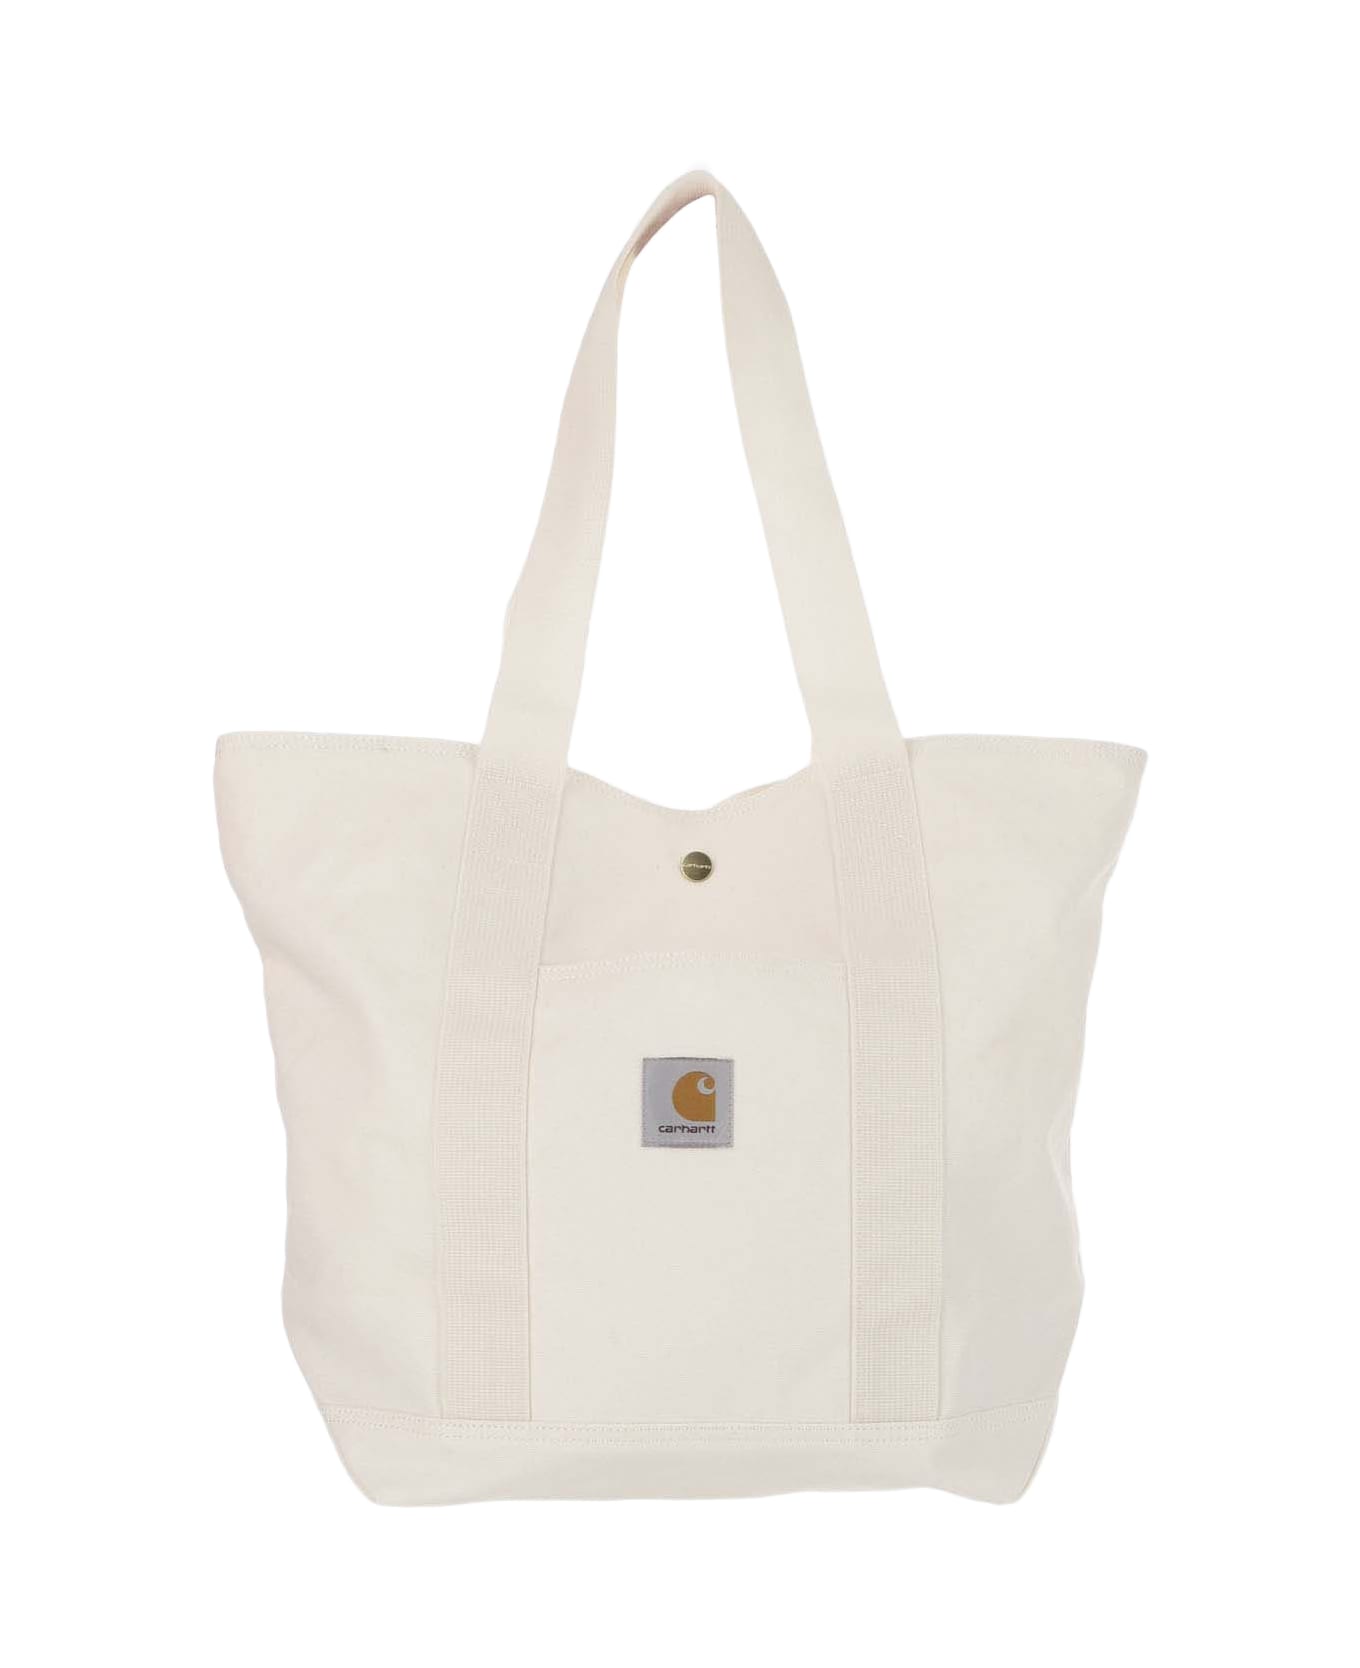 Carhartt Canvas Tote Bag With Logo - Natural トートバッグ